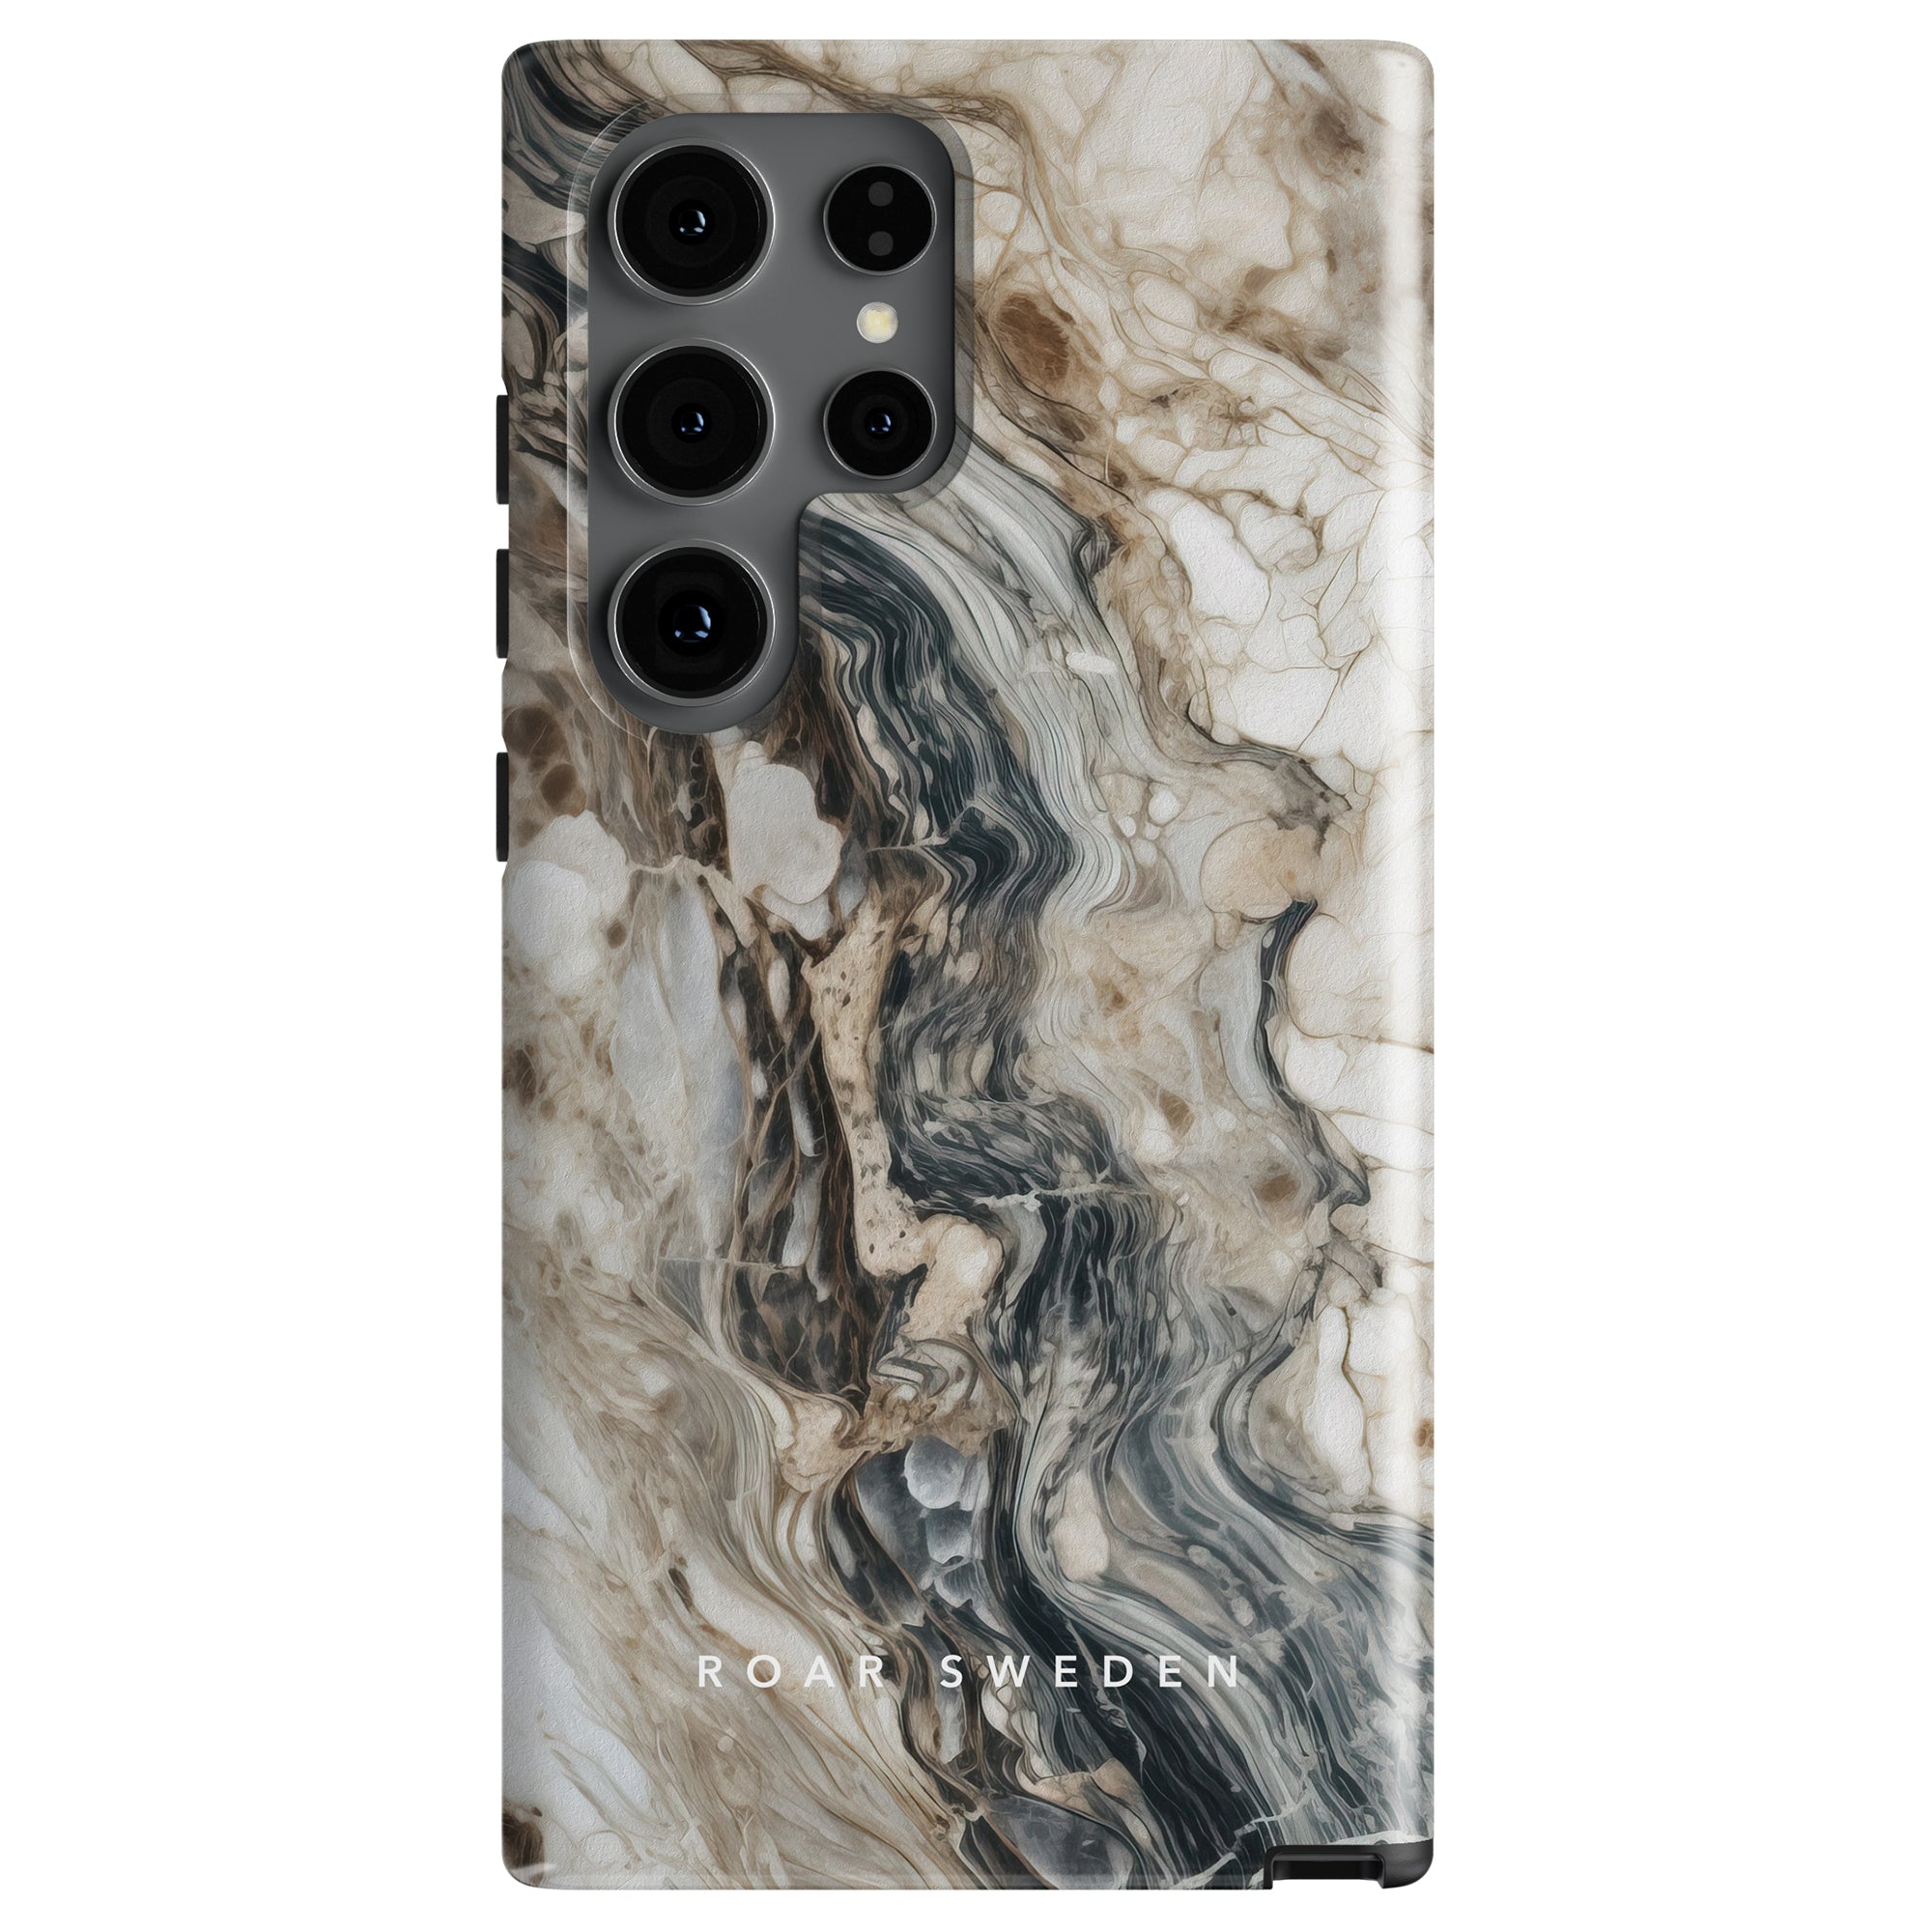 A smartphone with a marbled case featuring swirls of black, brown, and white from the Ocean-kollektion, with "Napoleon - Tough Case" printed at the bottom.